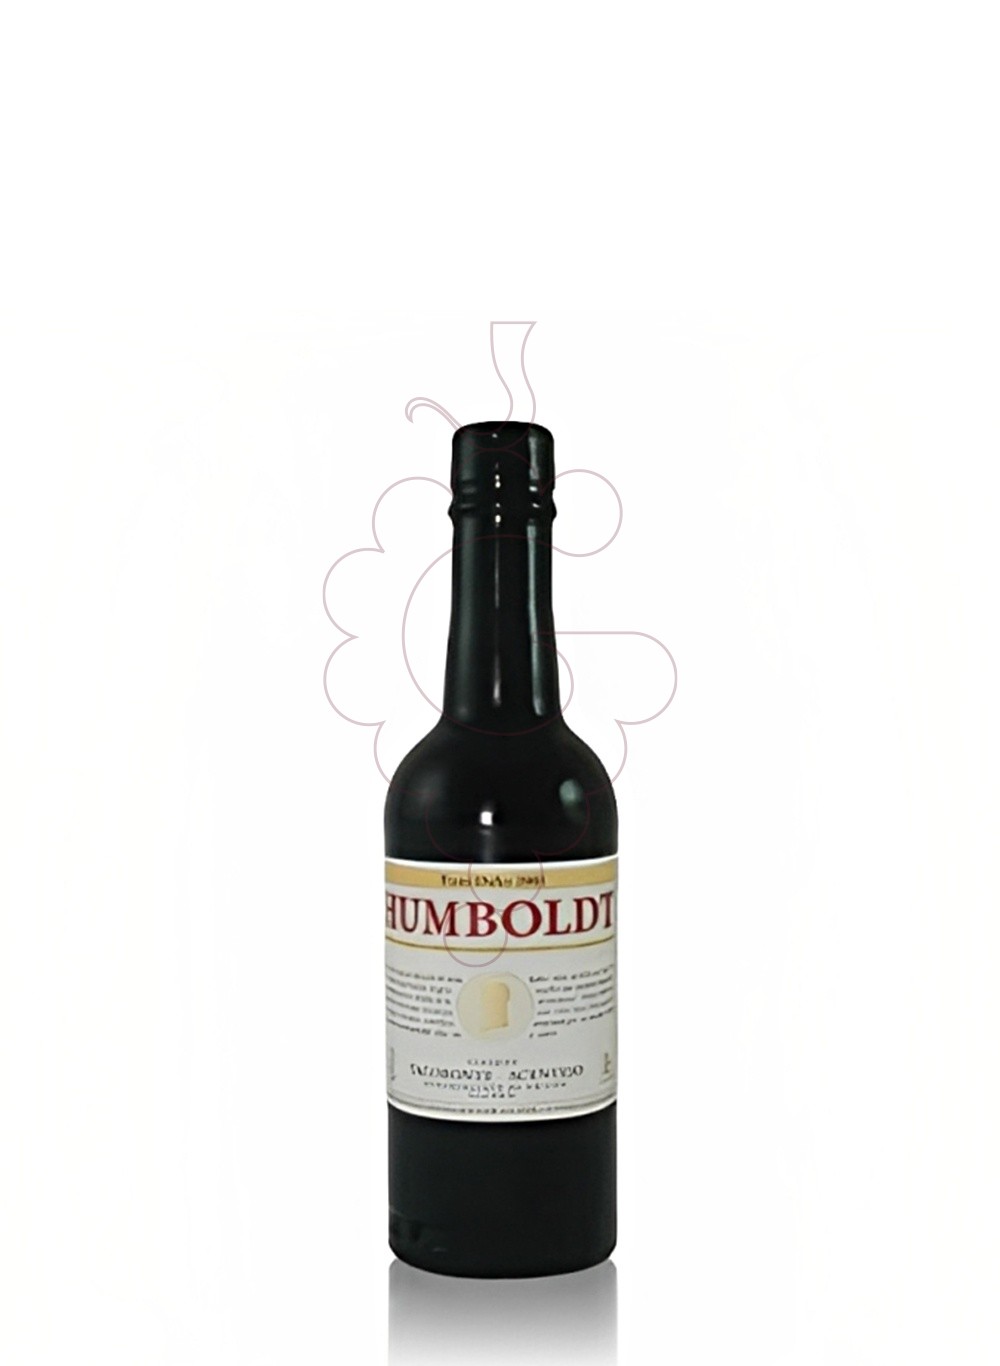 Photo Humboldt negre doll? 37,5 cl fortified wine